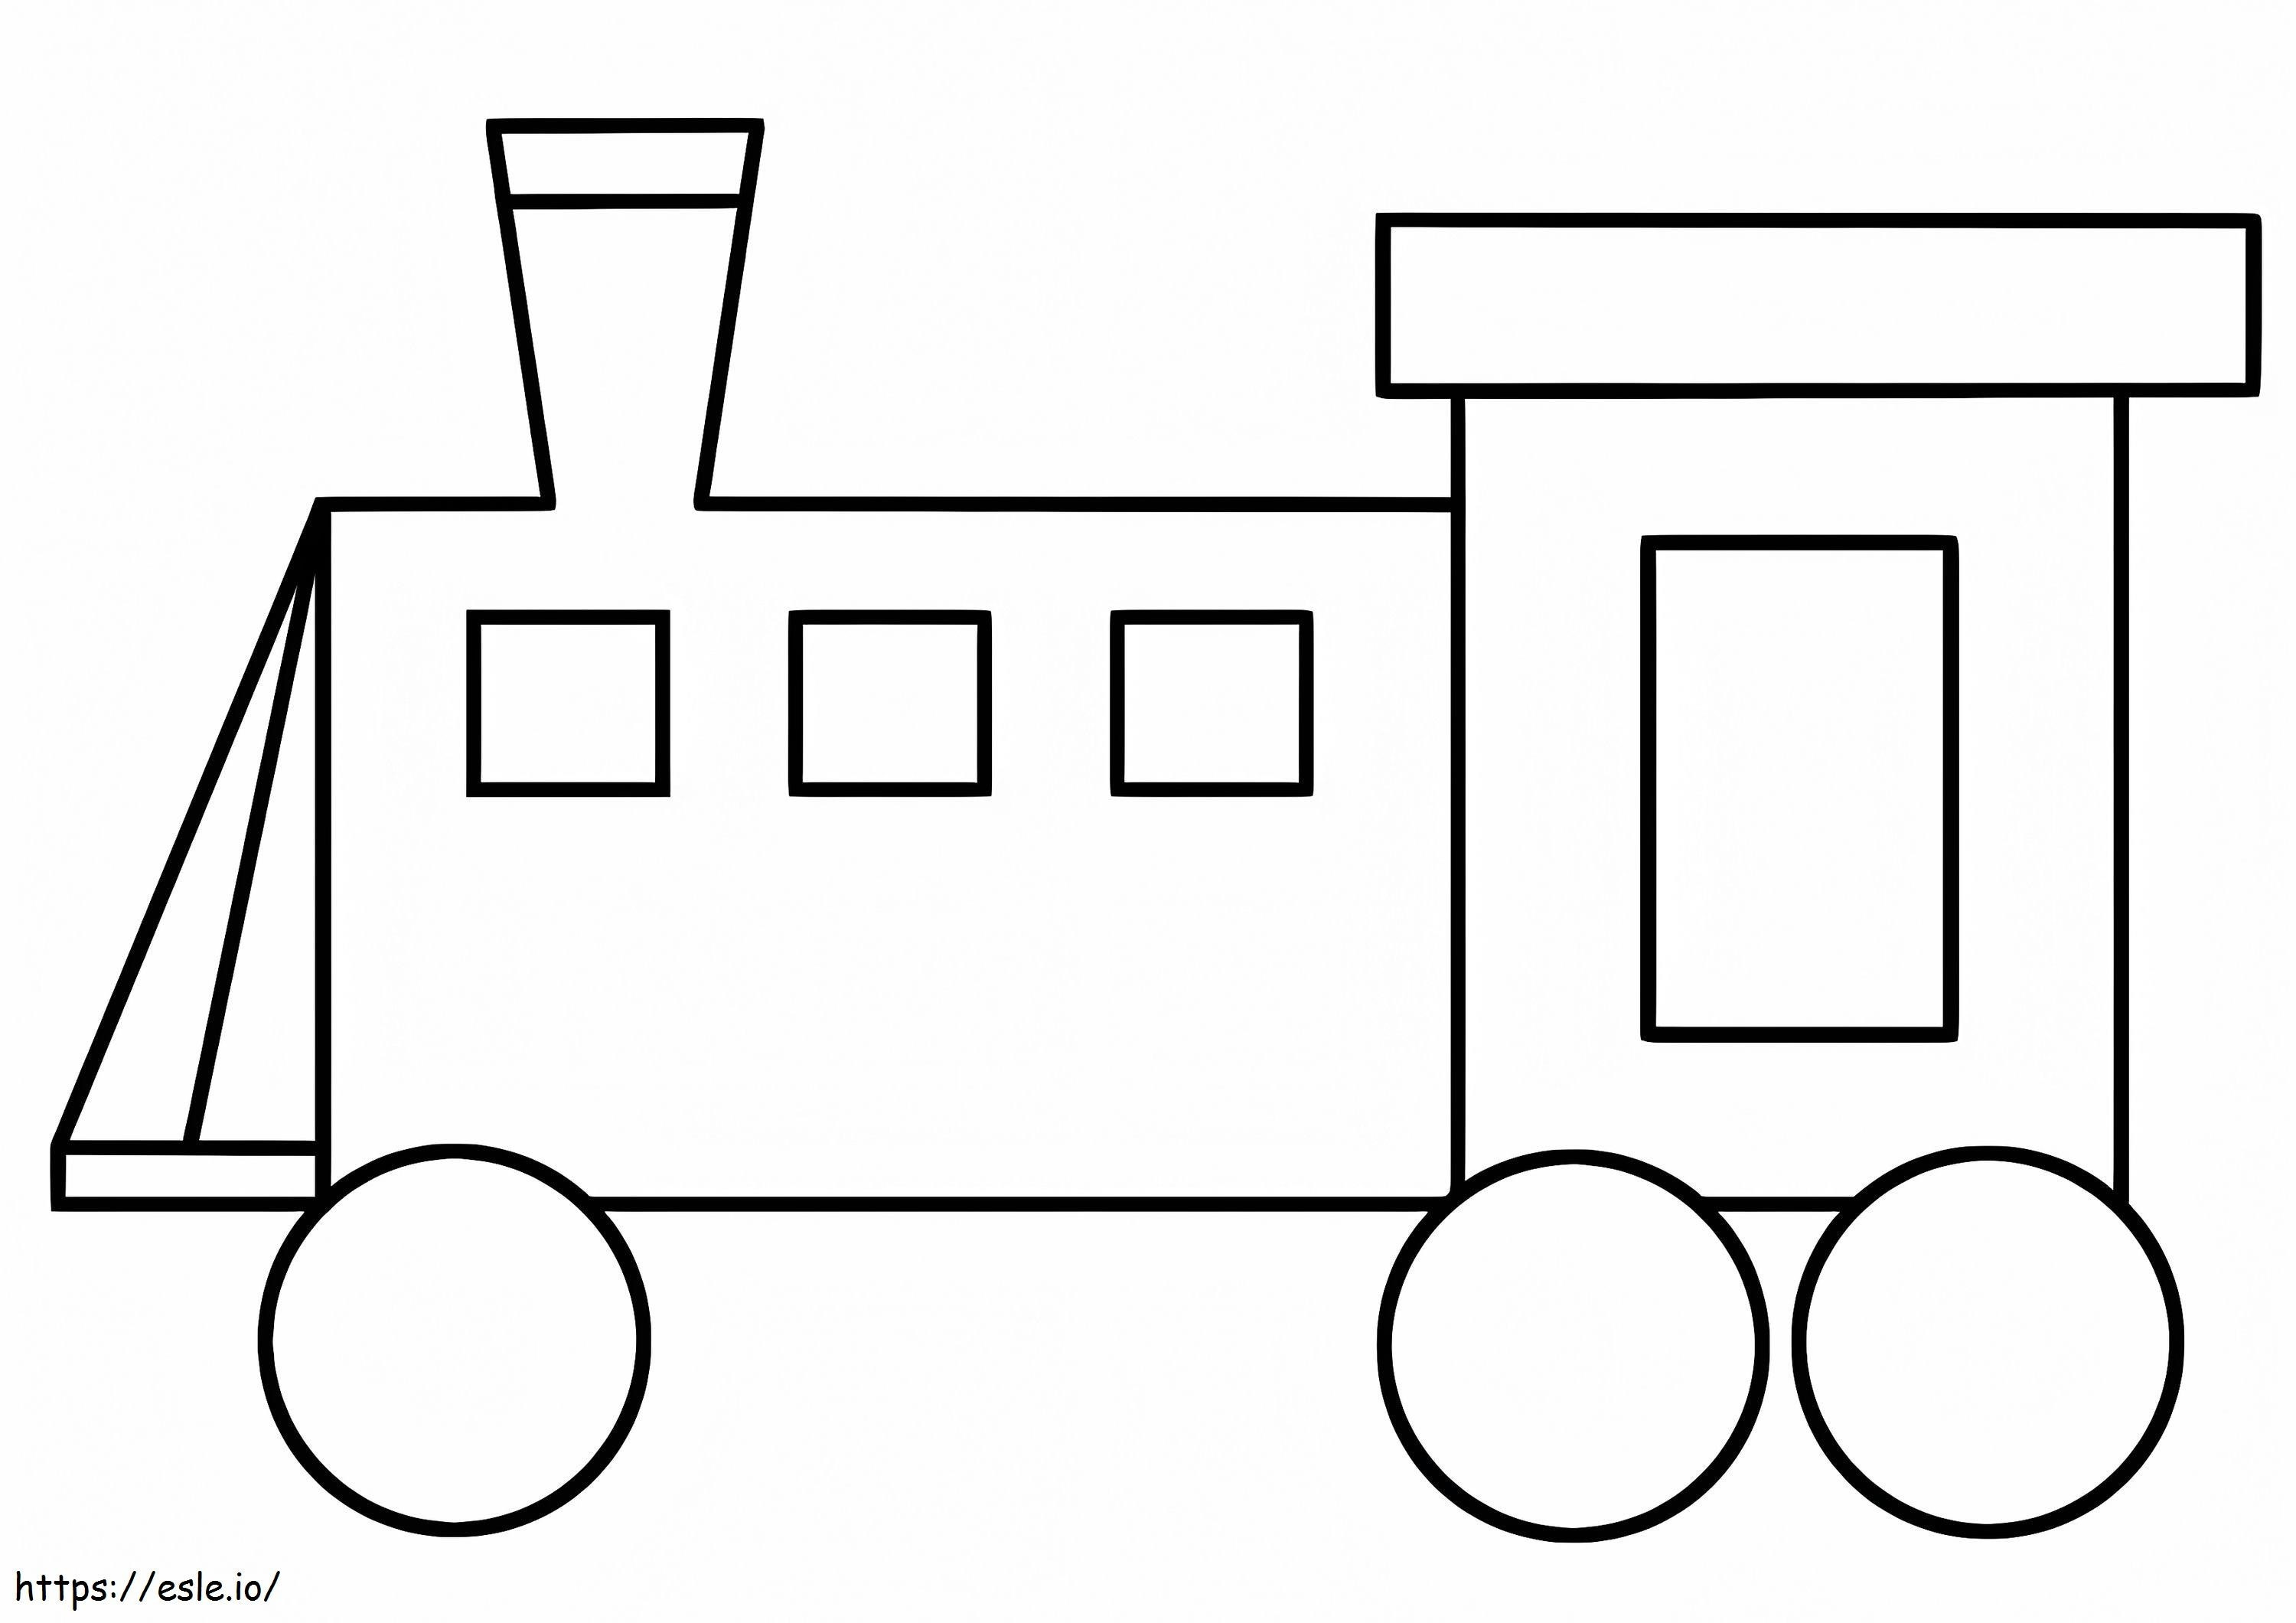 Simple Train Engine coloring page